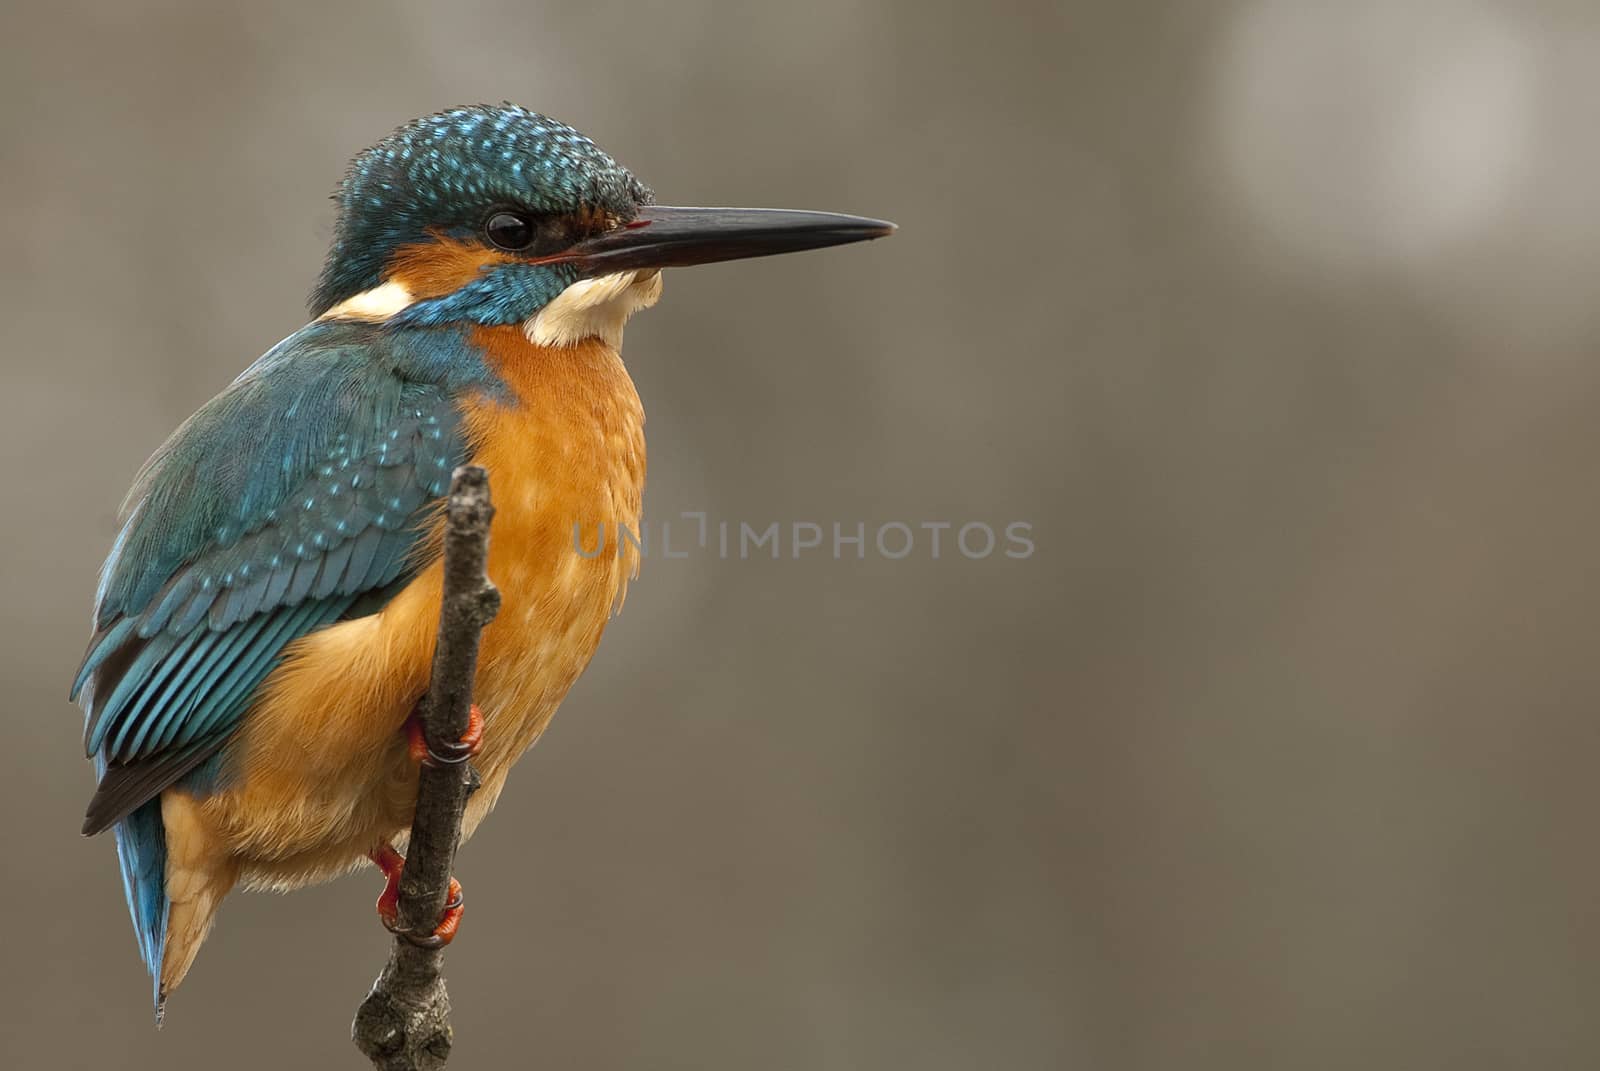 Kingfisher (Alcedo atthis) perched by jalonsohu@gmail.com